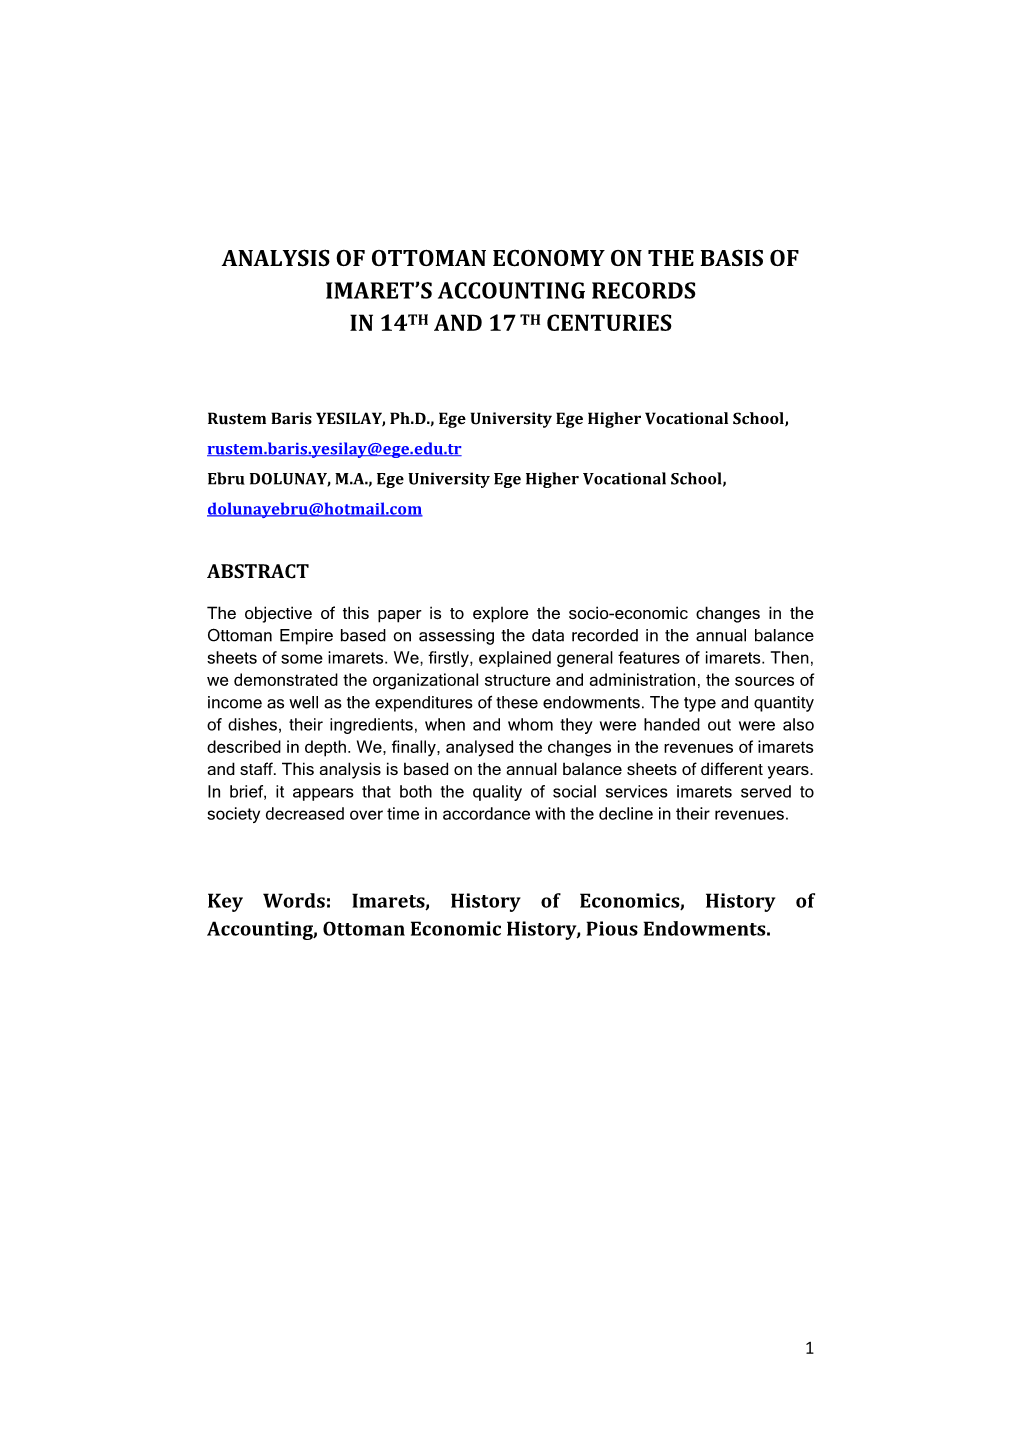 Analysis of Ottoman Economy on the Basis of Imaret's Accounting Records